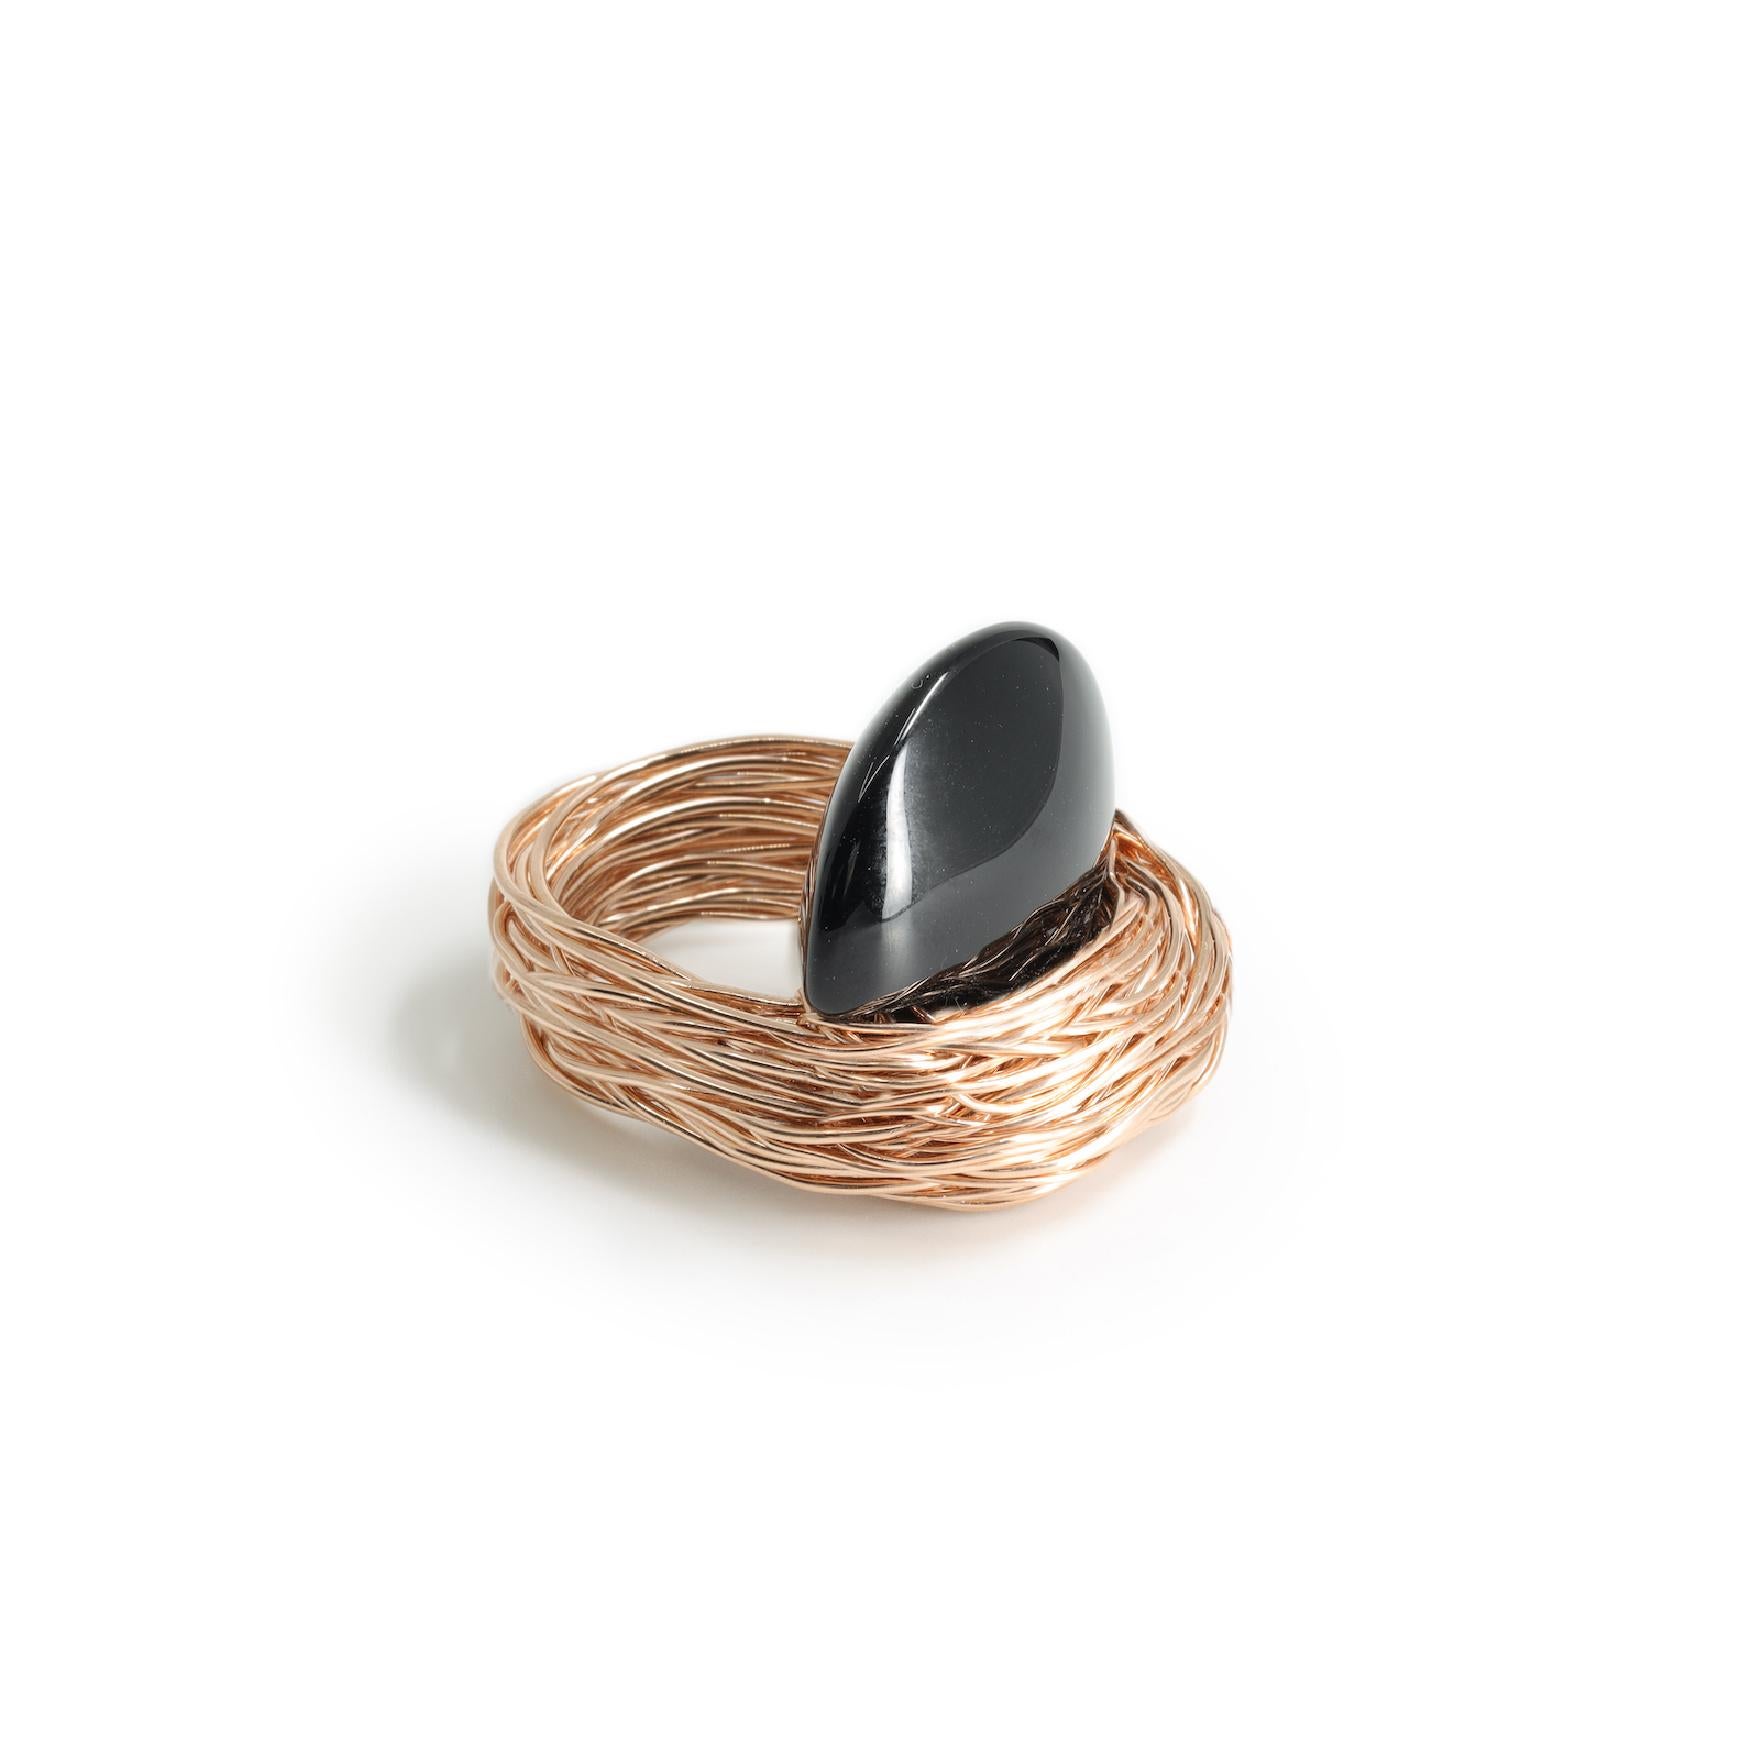 Black Agate 14 kt Rose gold F. one-off Minimal style Cocktail Ring by the artist For Sale 2